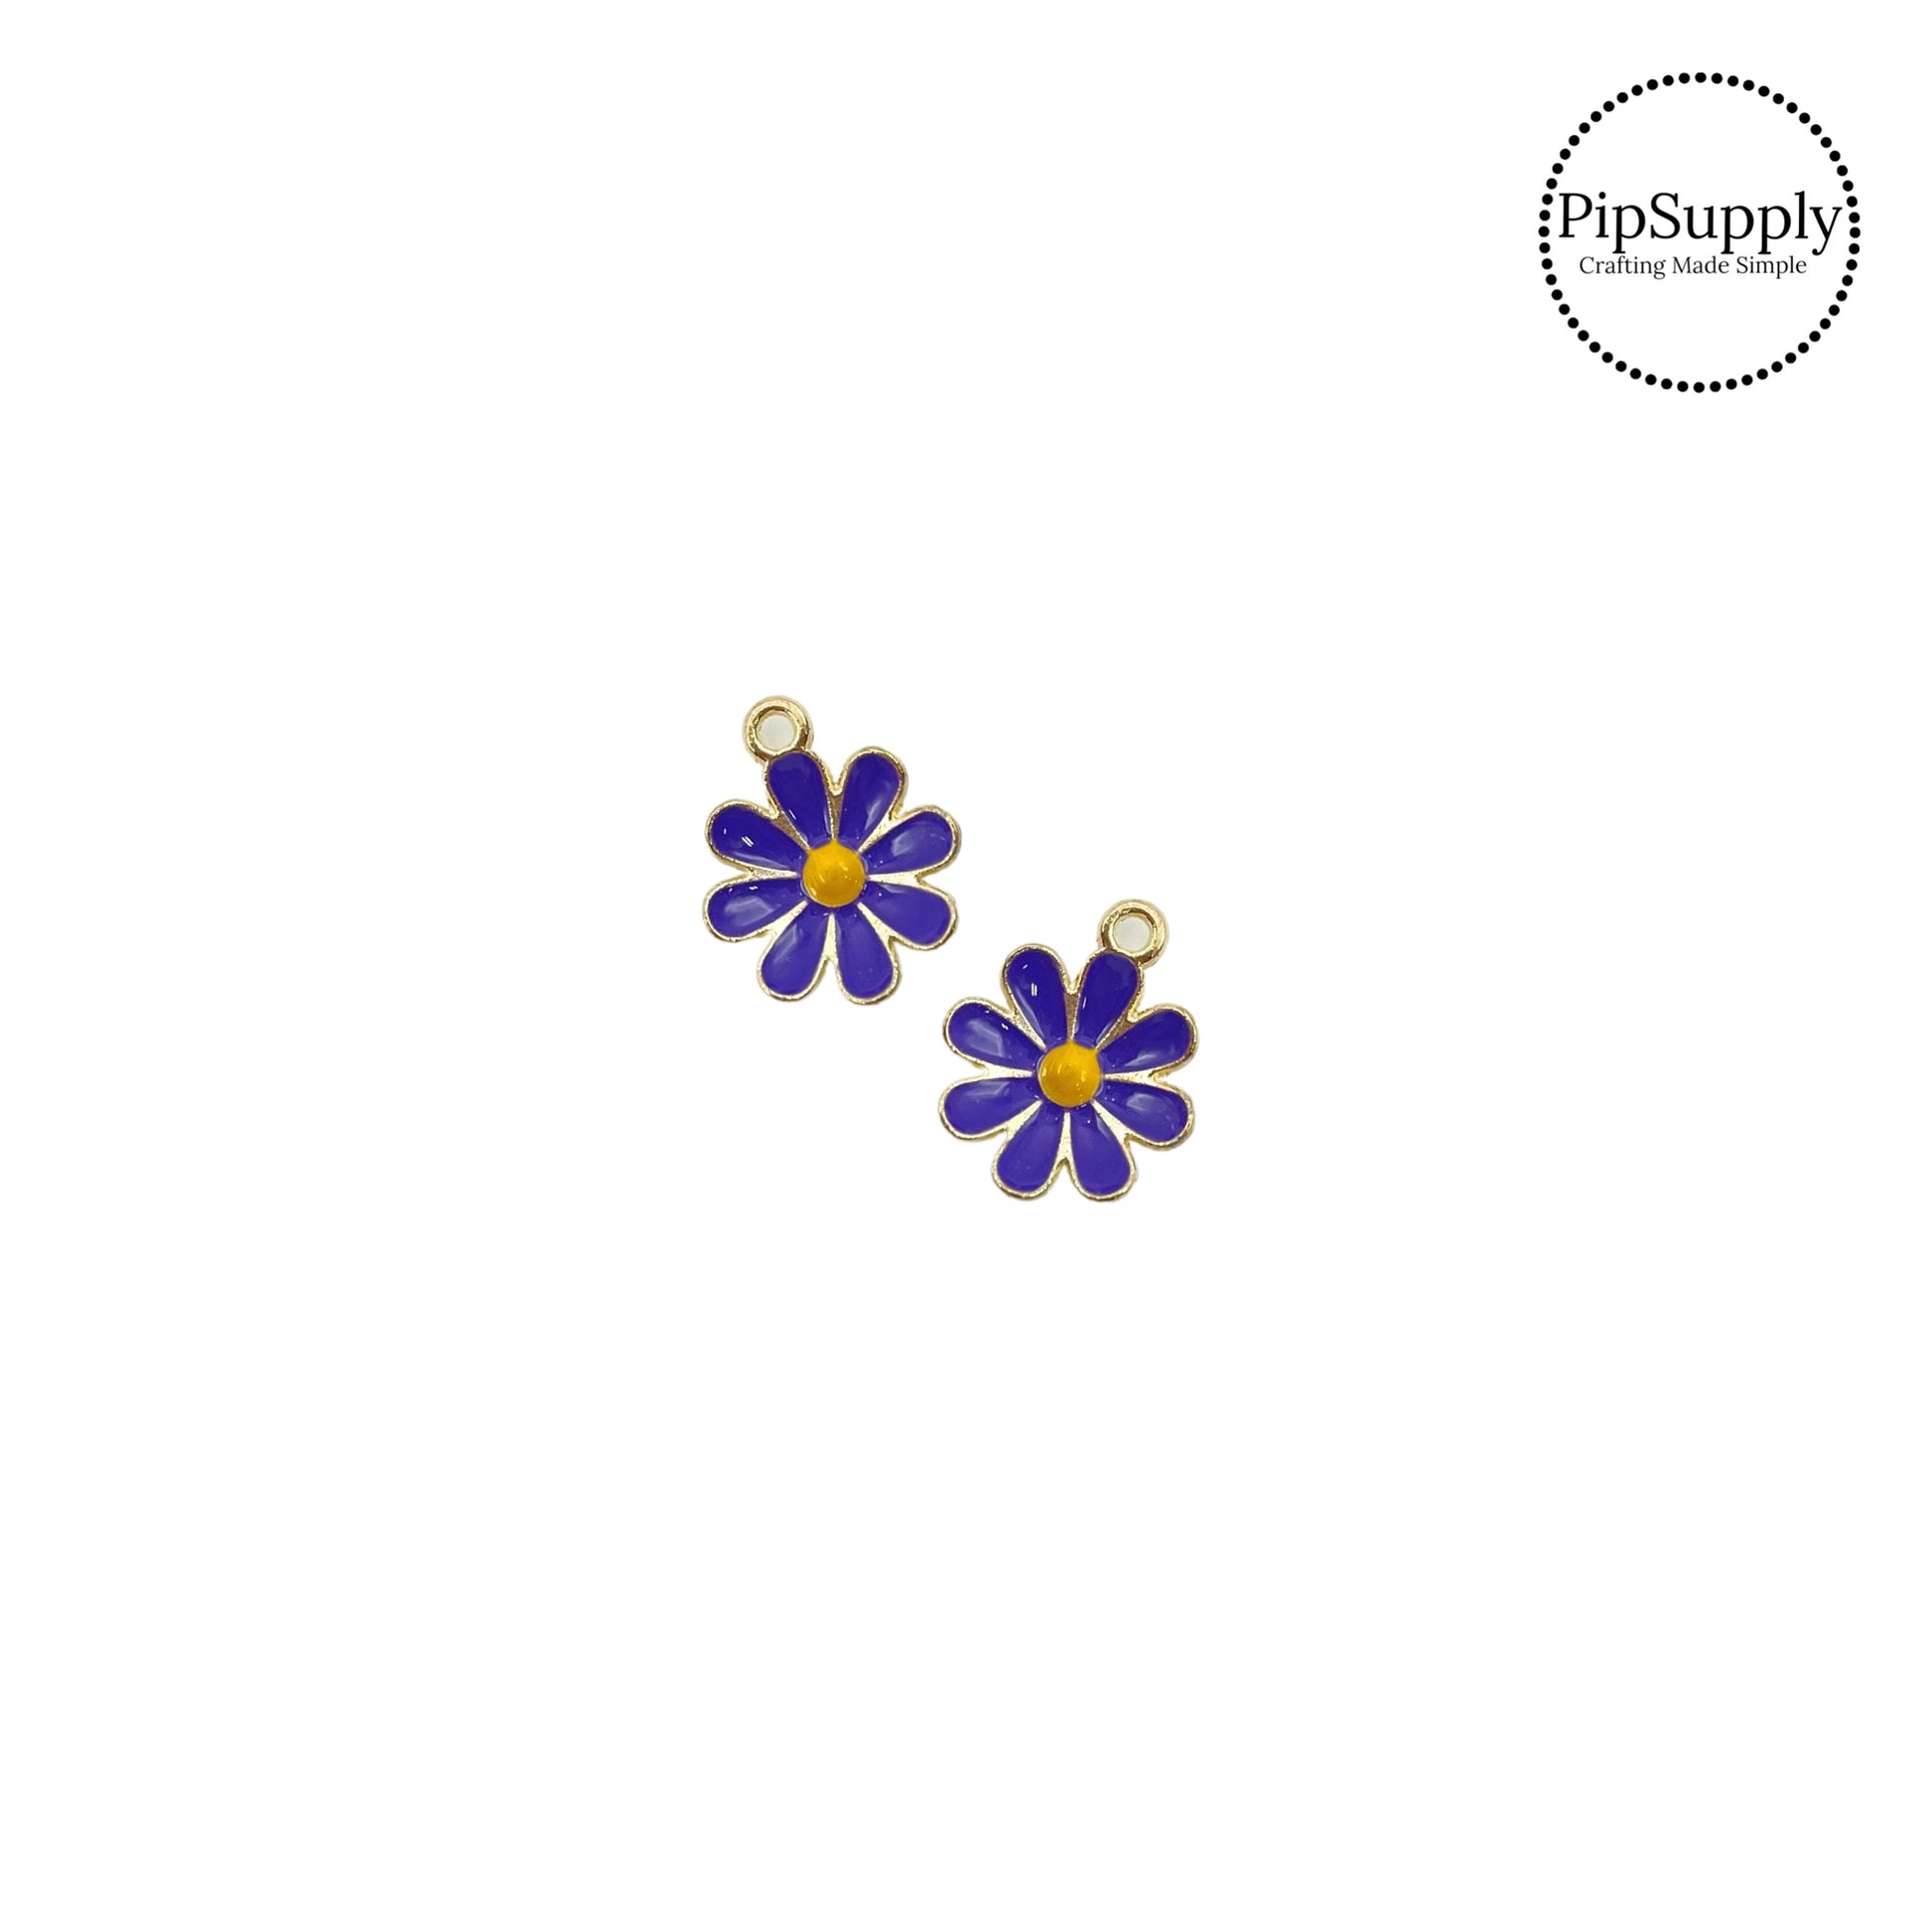 Purple flower with yellow center charm embellishment